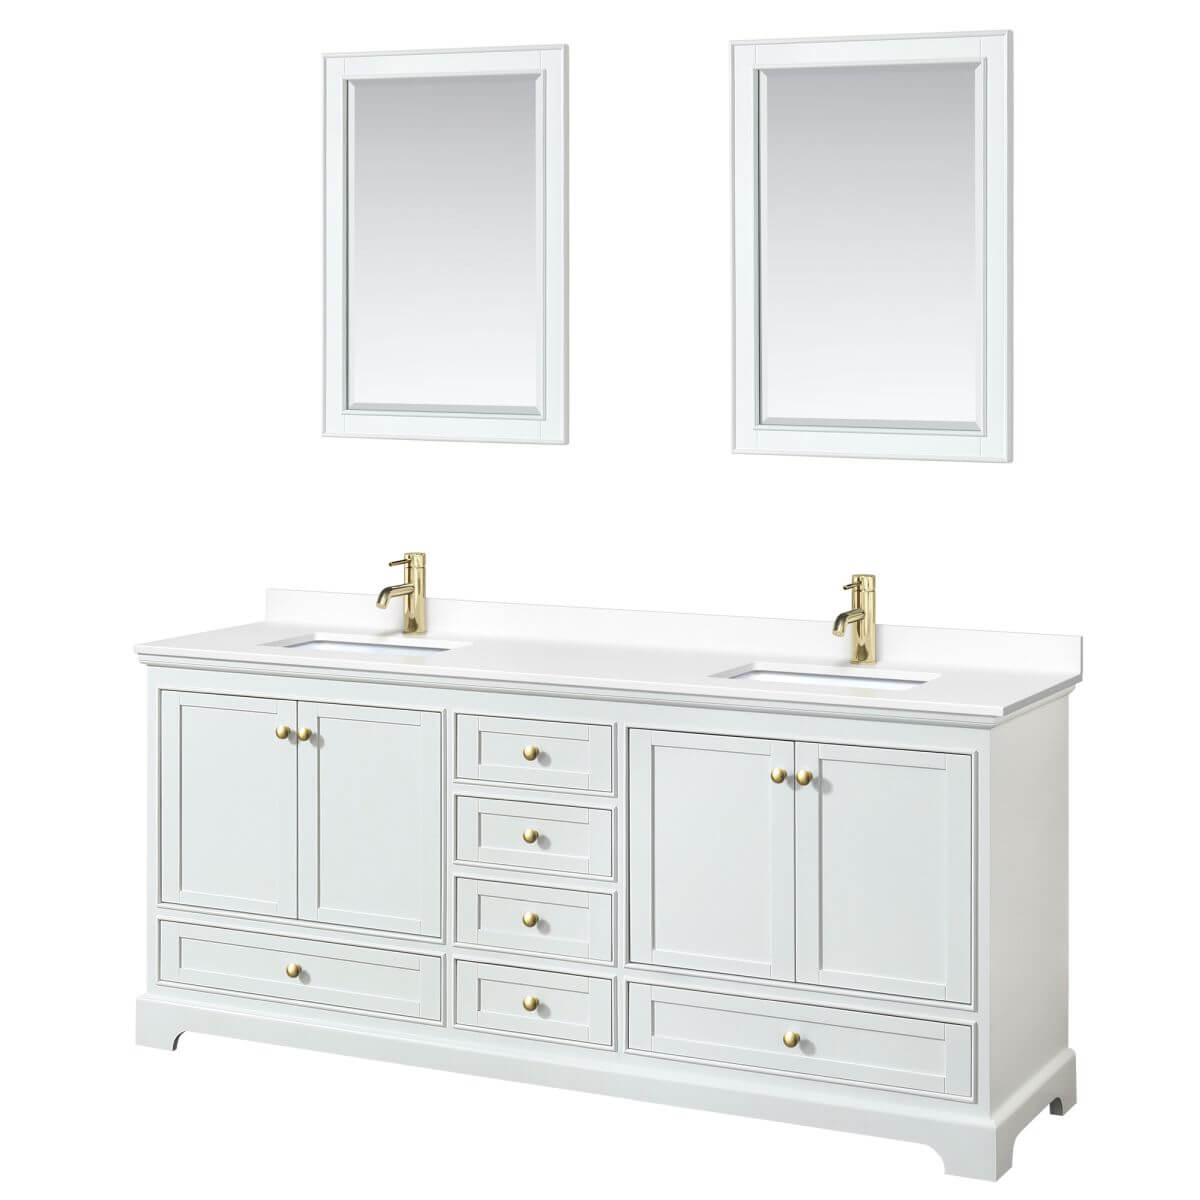 Wyndham Collection Deborah 80 inch Double Bathroom Vanity in White with White Cultured Marble Countertop, Undermount Square Sinks, Brushed Gold Trim and 24 inch Mirrors - WCS202080DWGWCUNSM24